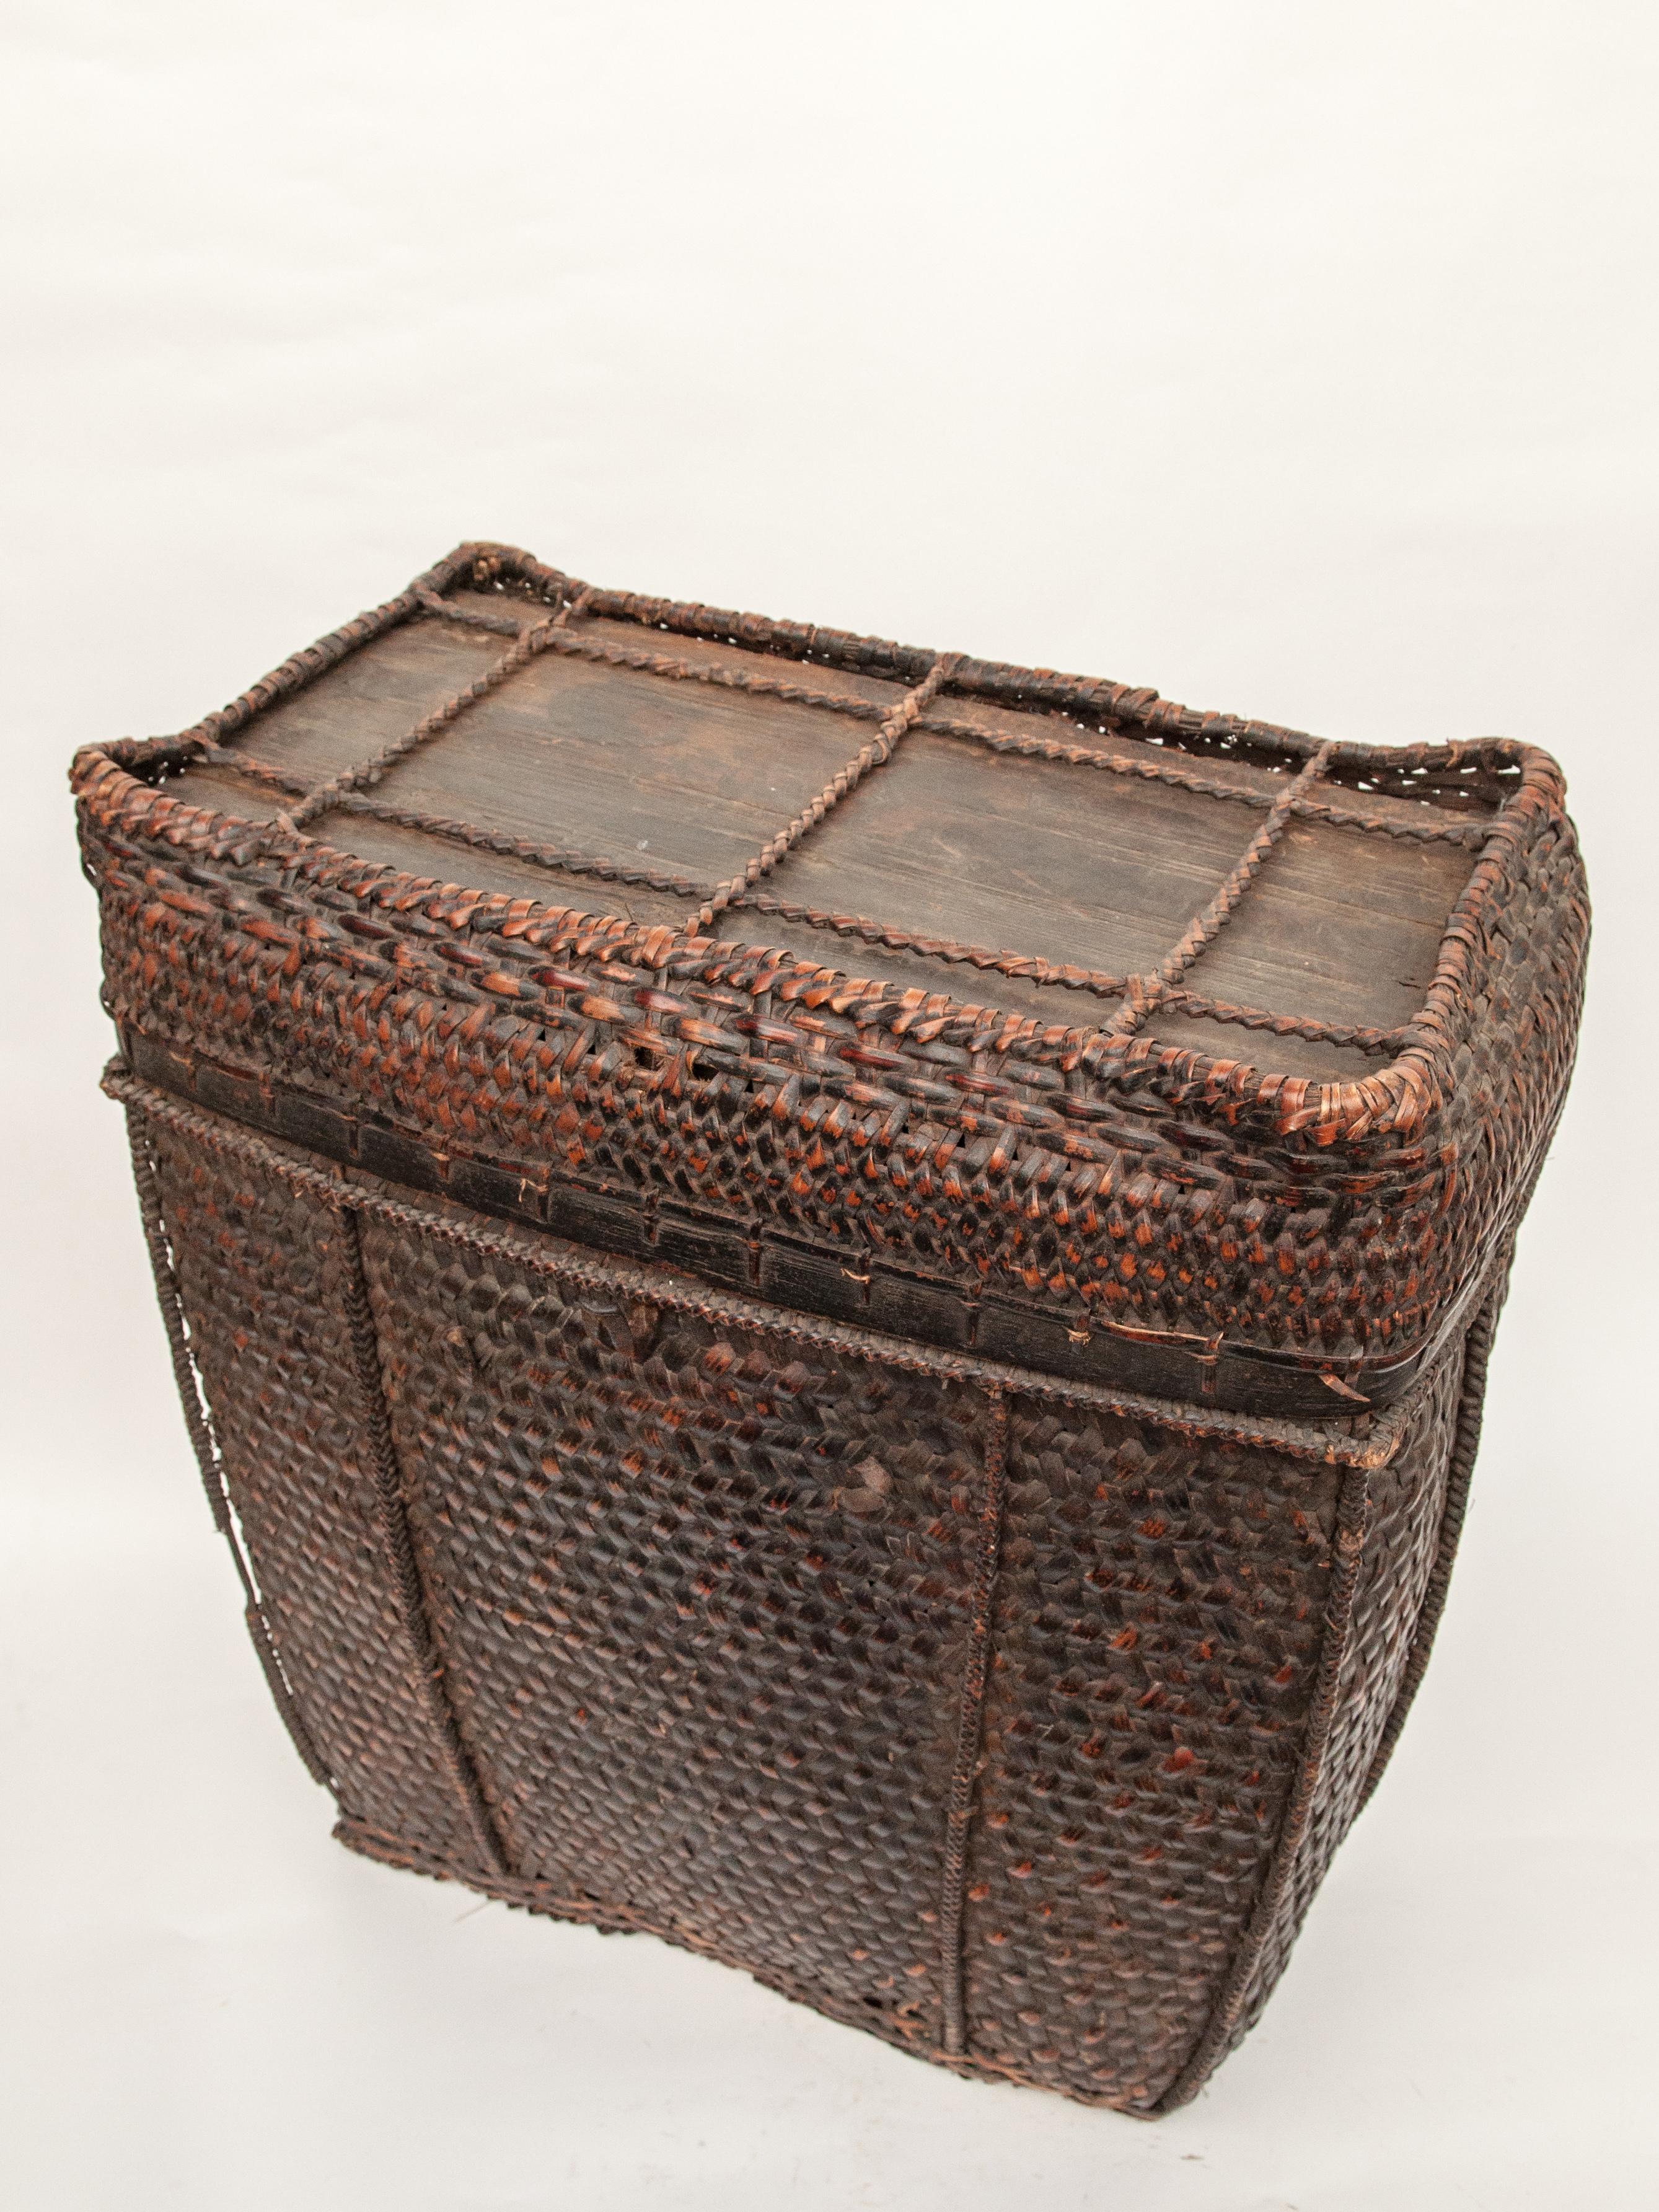 Hand-Crafted Large Vintage Tribal Storage Basket with Lid from Bhutan, Mid-Late 20th Century